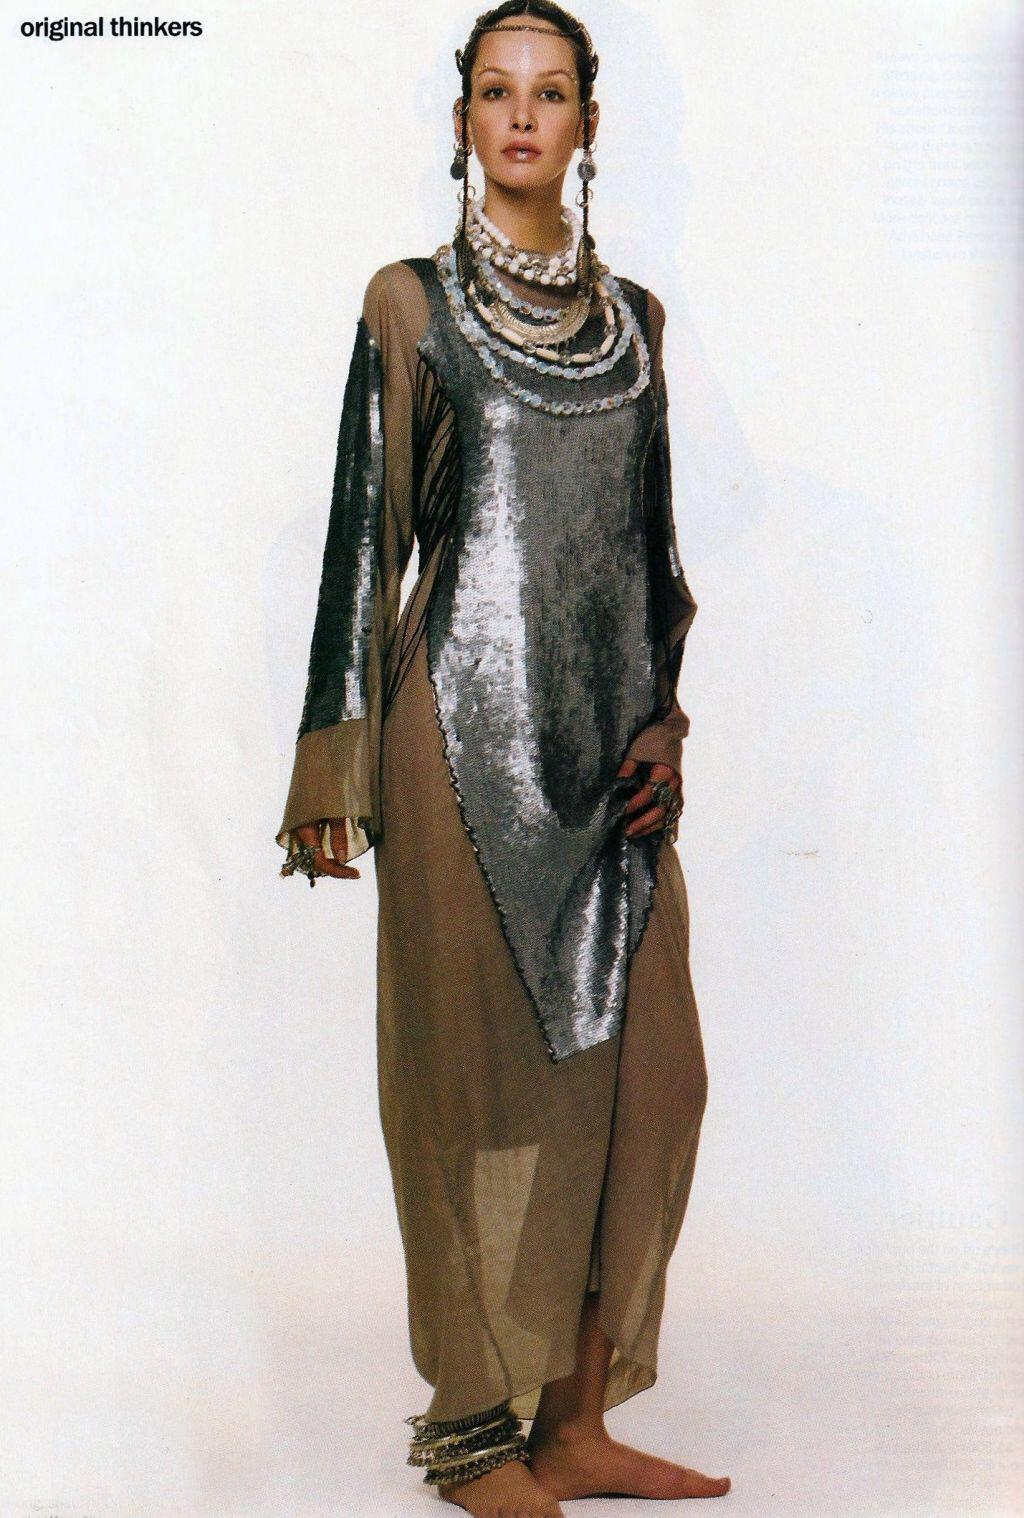 Jean Paul Gaultier; Loosely fit maxi dress in a muted green cotton with silver sequin motifs with beaded hoops and lace up corset style fastenings at the sides.   

Spring-Summer 1994  

'It's my way of merging the tight silhouette of the eighties